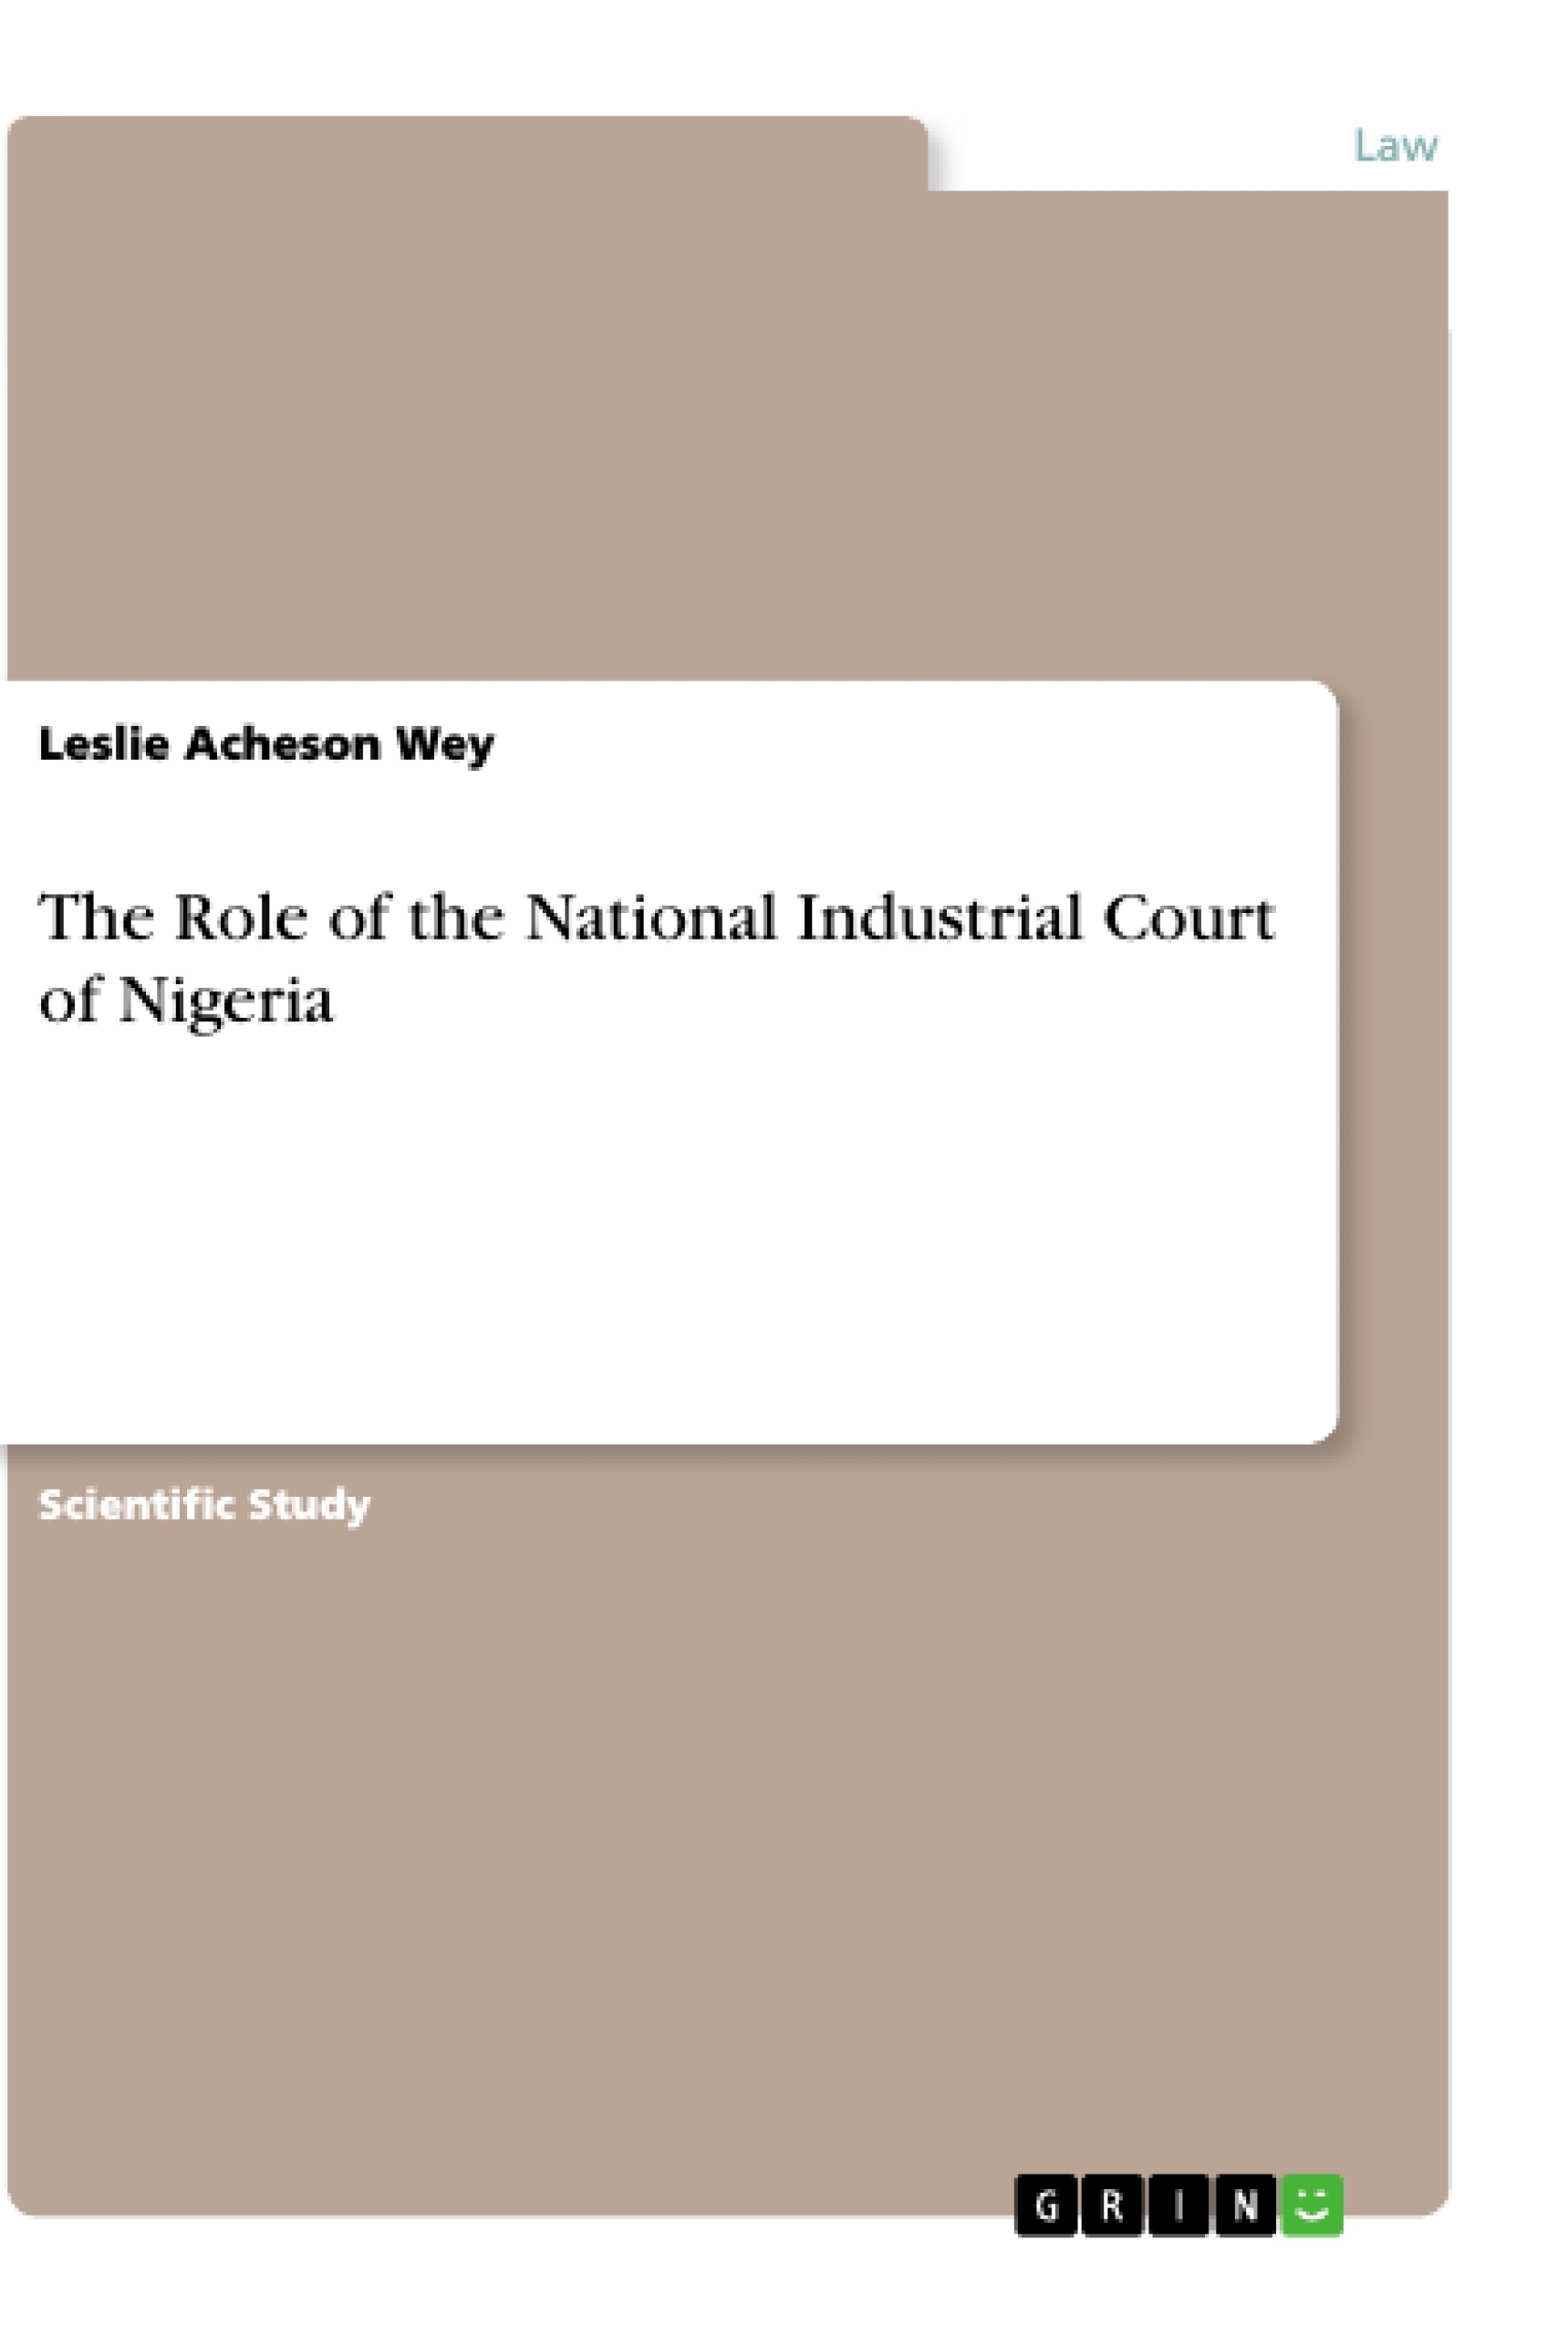 Title: The Role of the National Industrial Court of Nigeria